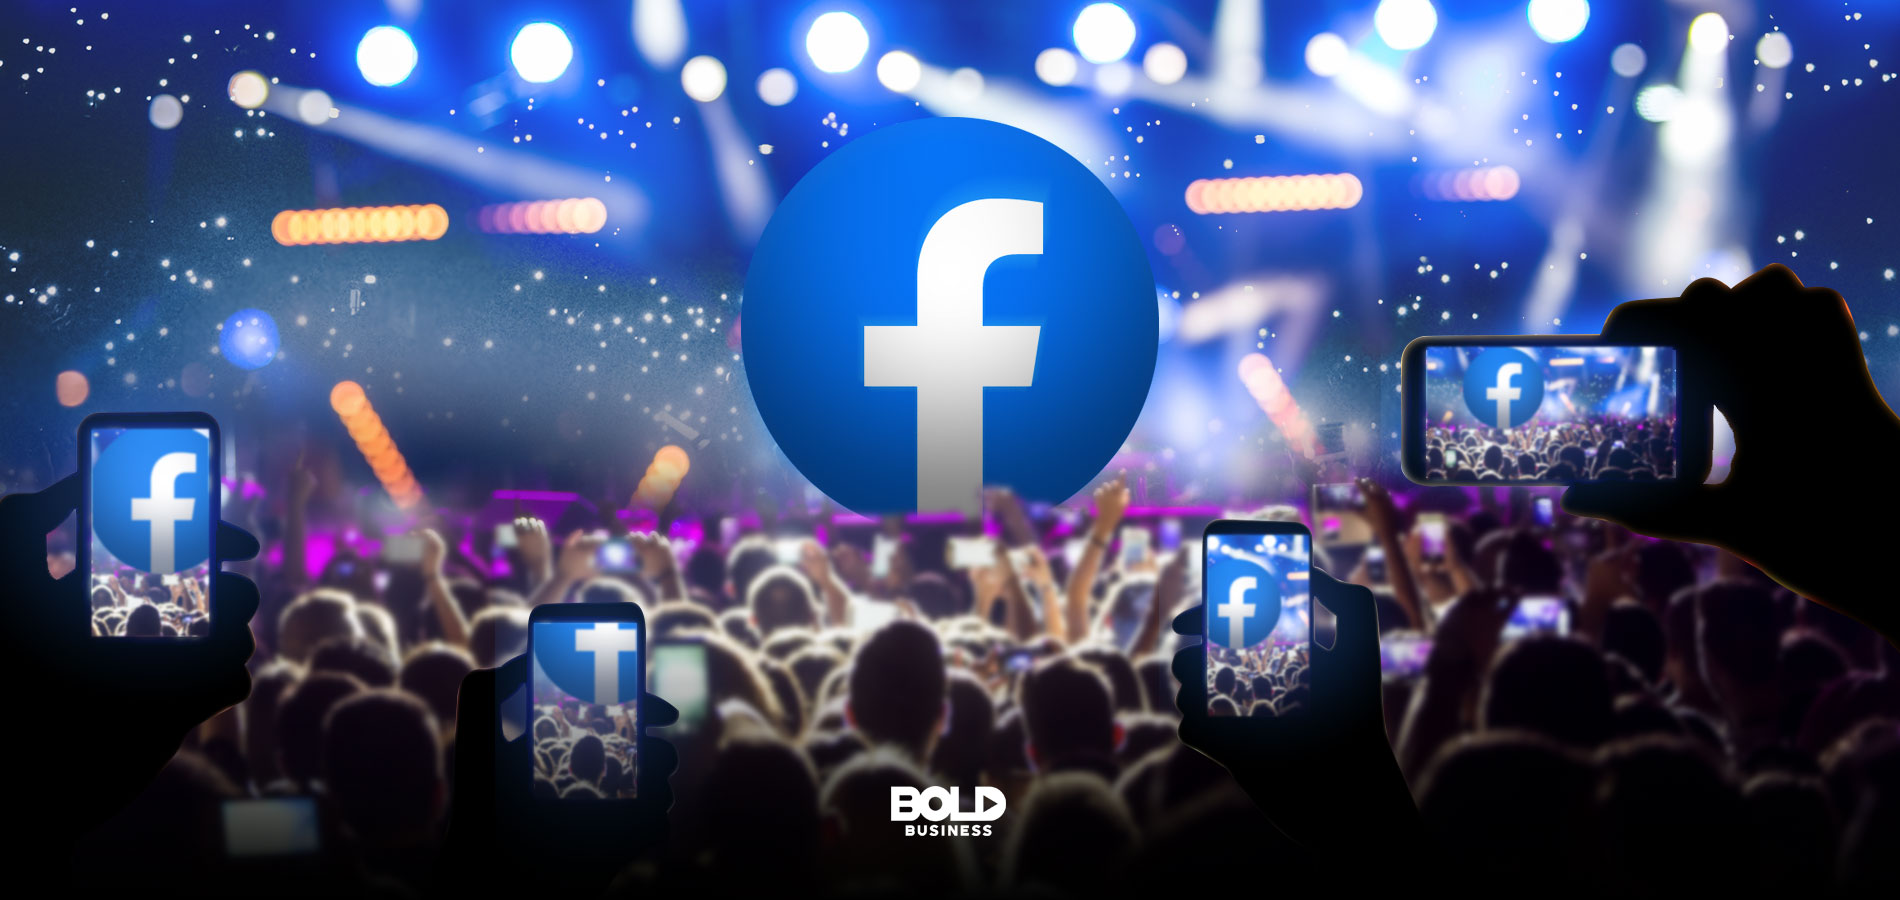 Some sort of Facebook concert. New products being launched using user data